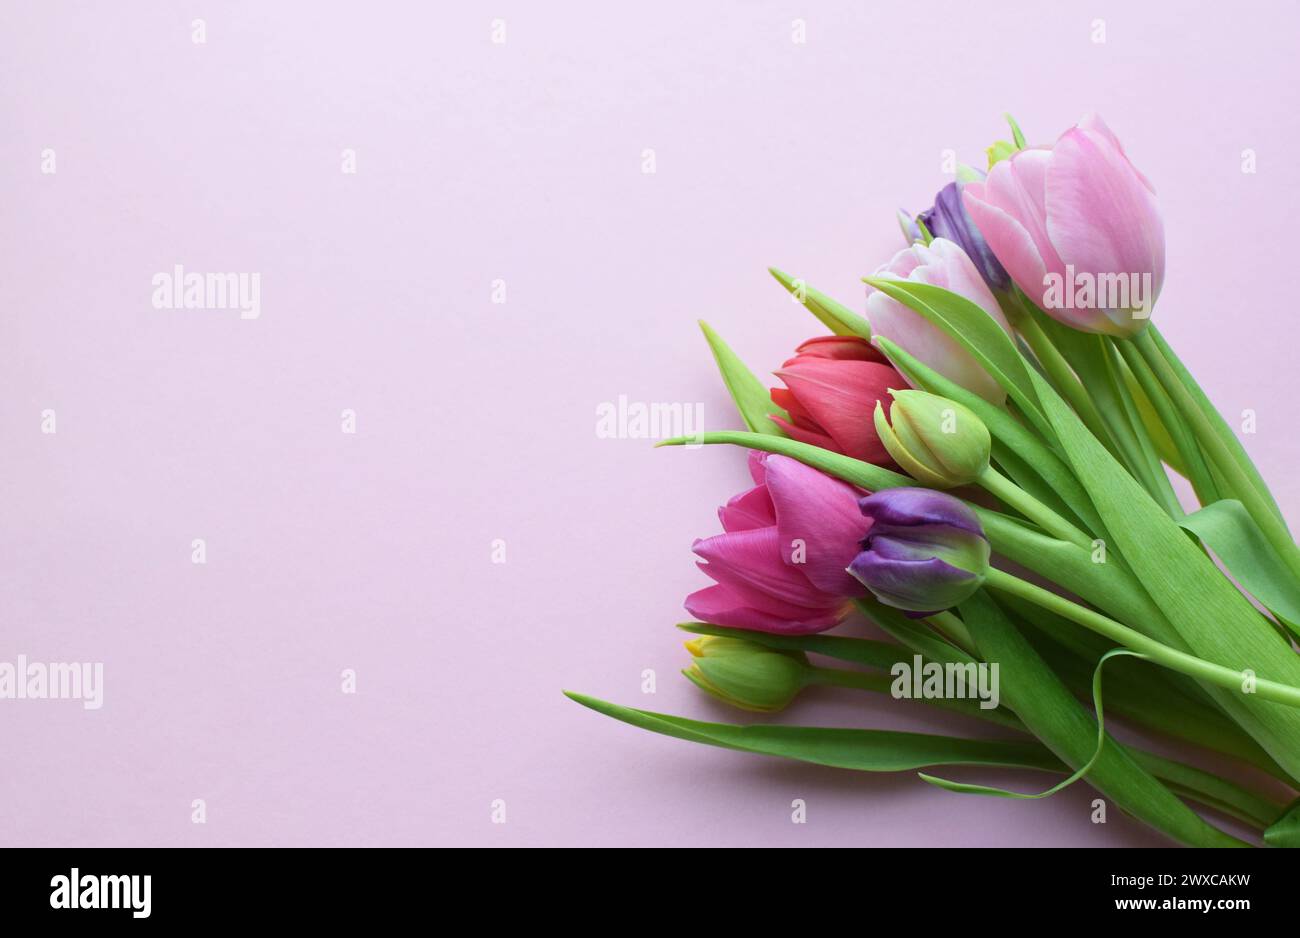 Bouquet of colorful spring tulips for Mother's Day or Women's Day on a  pink background.  Copy space. Stock Photo